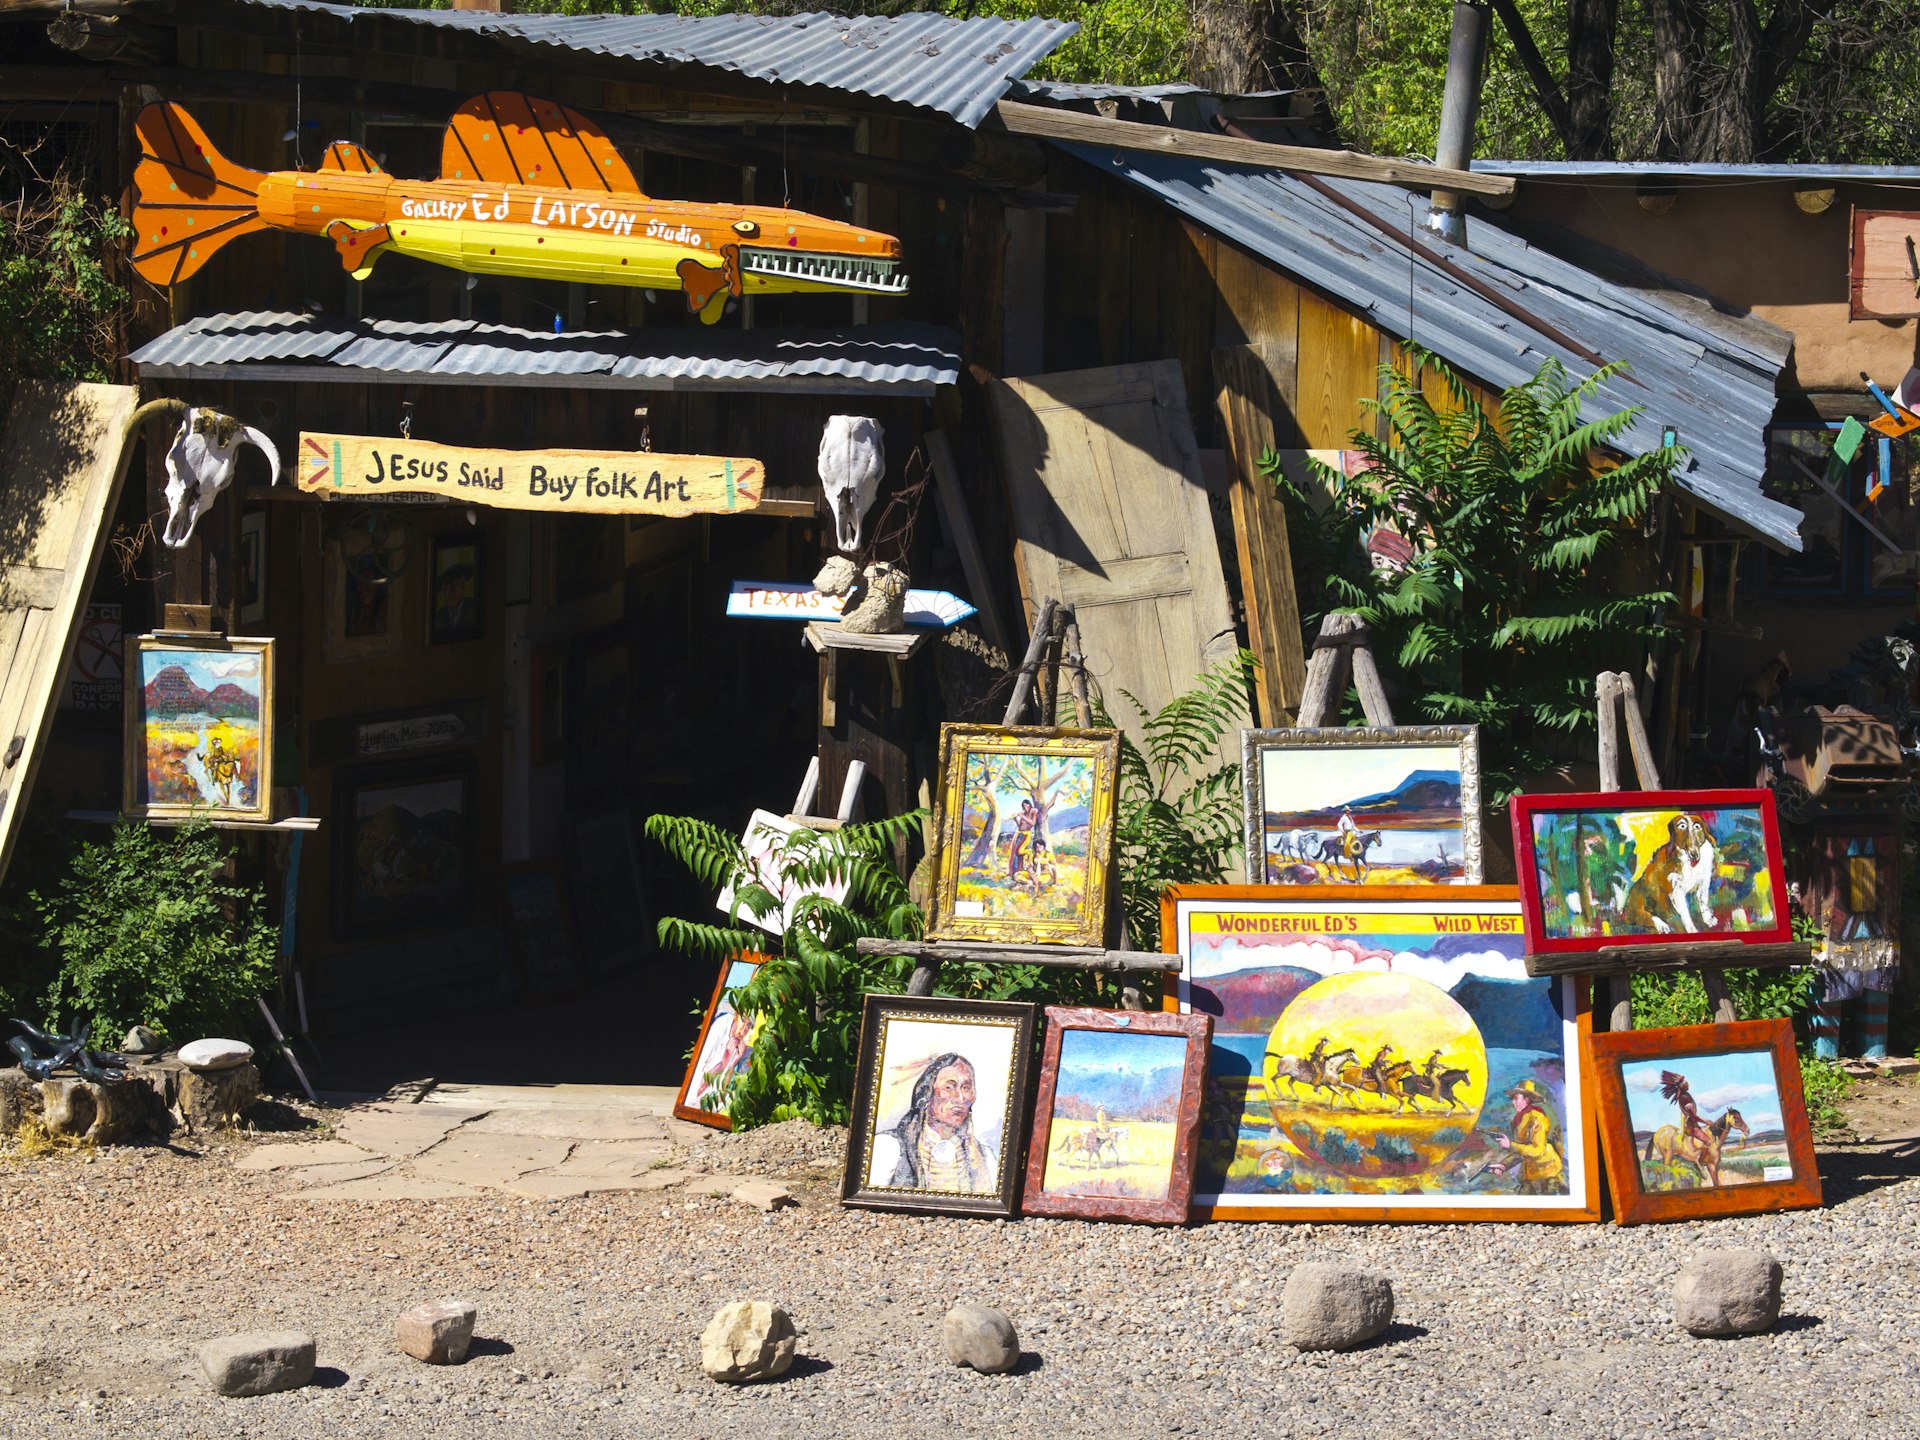 Ed Larson studio and gallery in a very old adobe and wood farm house with commercial sign inviting people to by folk art. In front of the gallery on the sun there are some paintings with motives from Wild West.